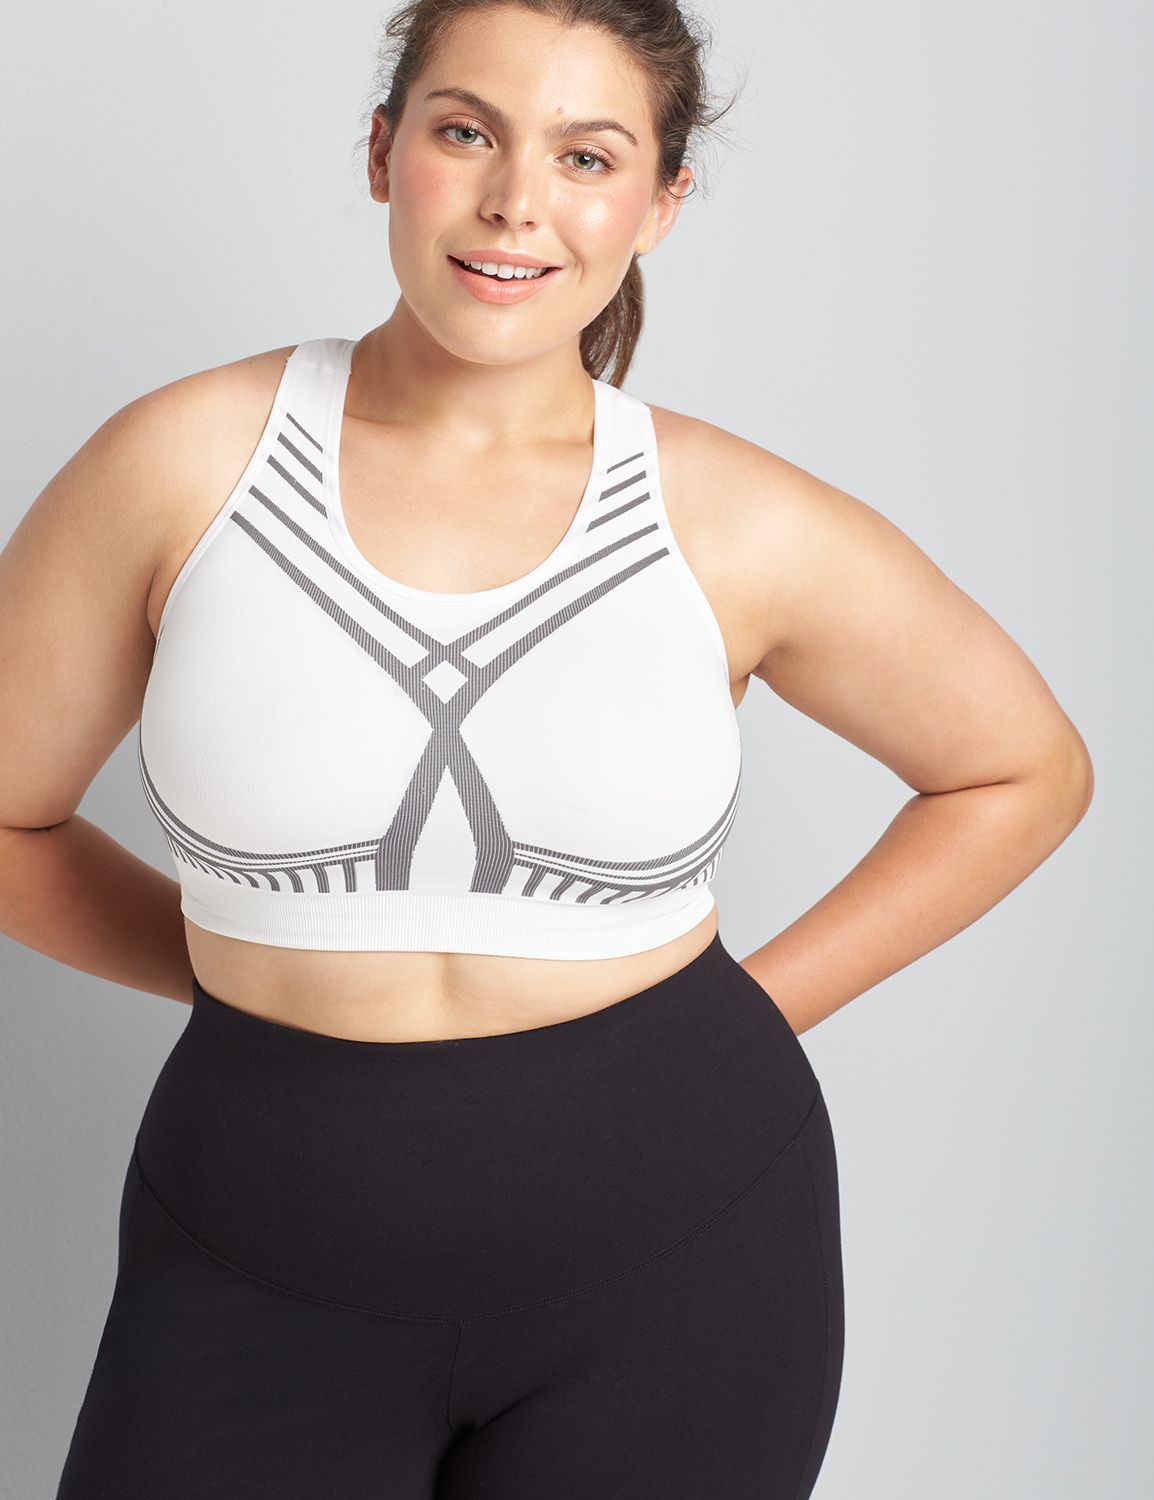 shopthedeal 50% Off LIVI Max Support Comfort Zip-Front Sports Bra /  BandSize 34 - 54. Cup Size B - DDD ✓